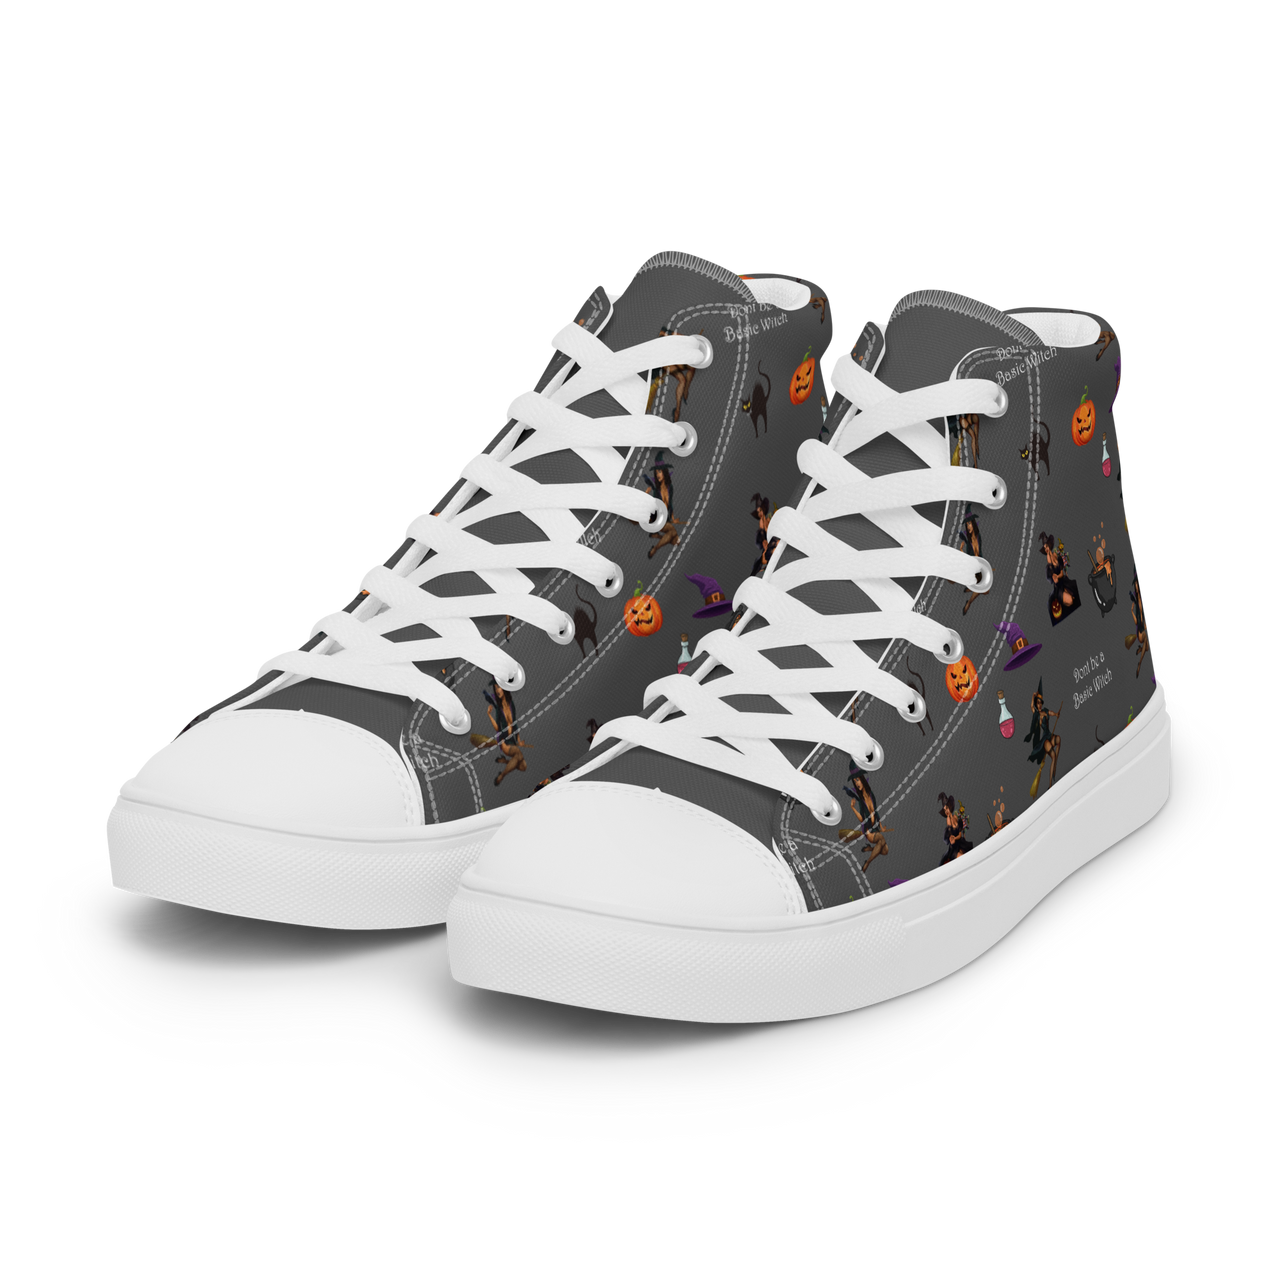 Halloween Men’s high top canvas shoes, Halloween All Over Print Men’s high top canvas shoes ,Men's shoes/Don't be a Basic Witch SHAVA